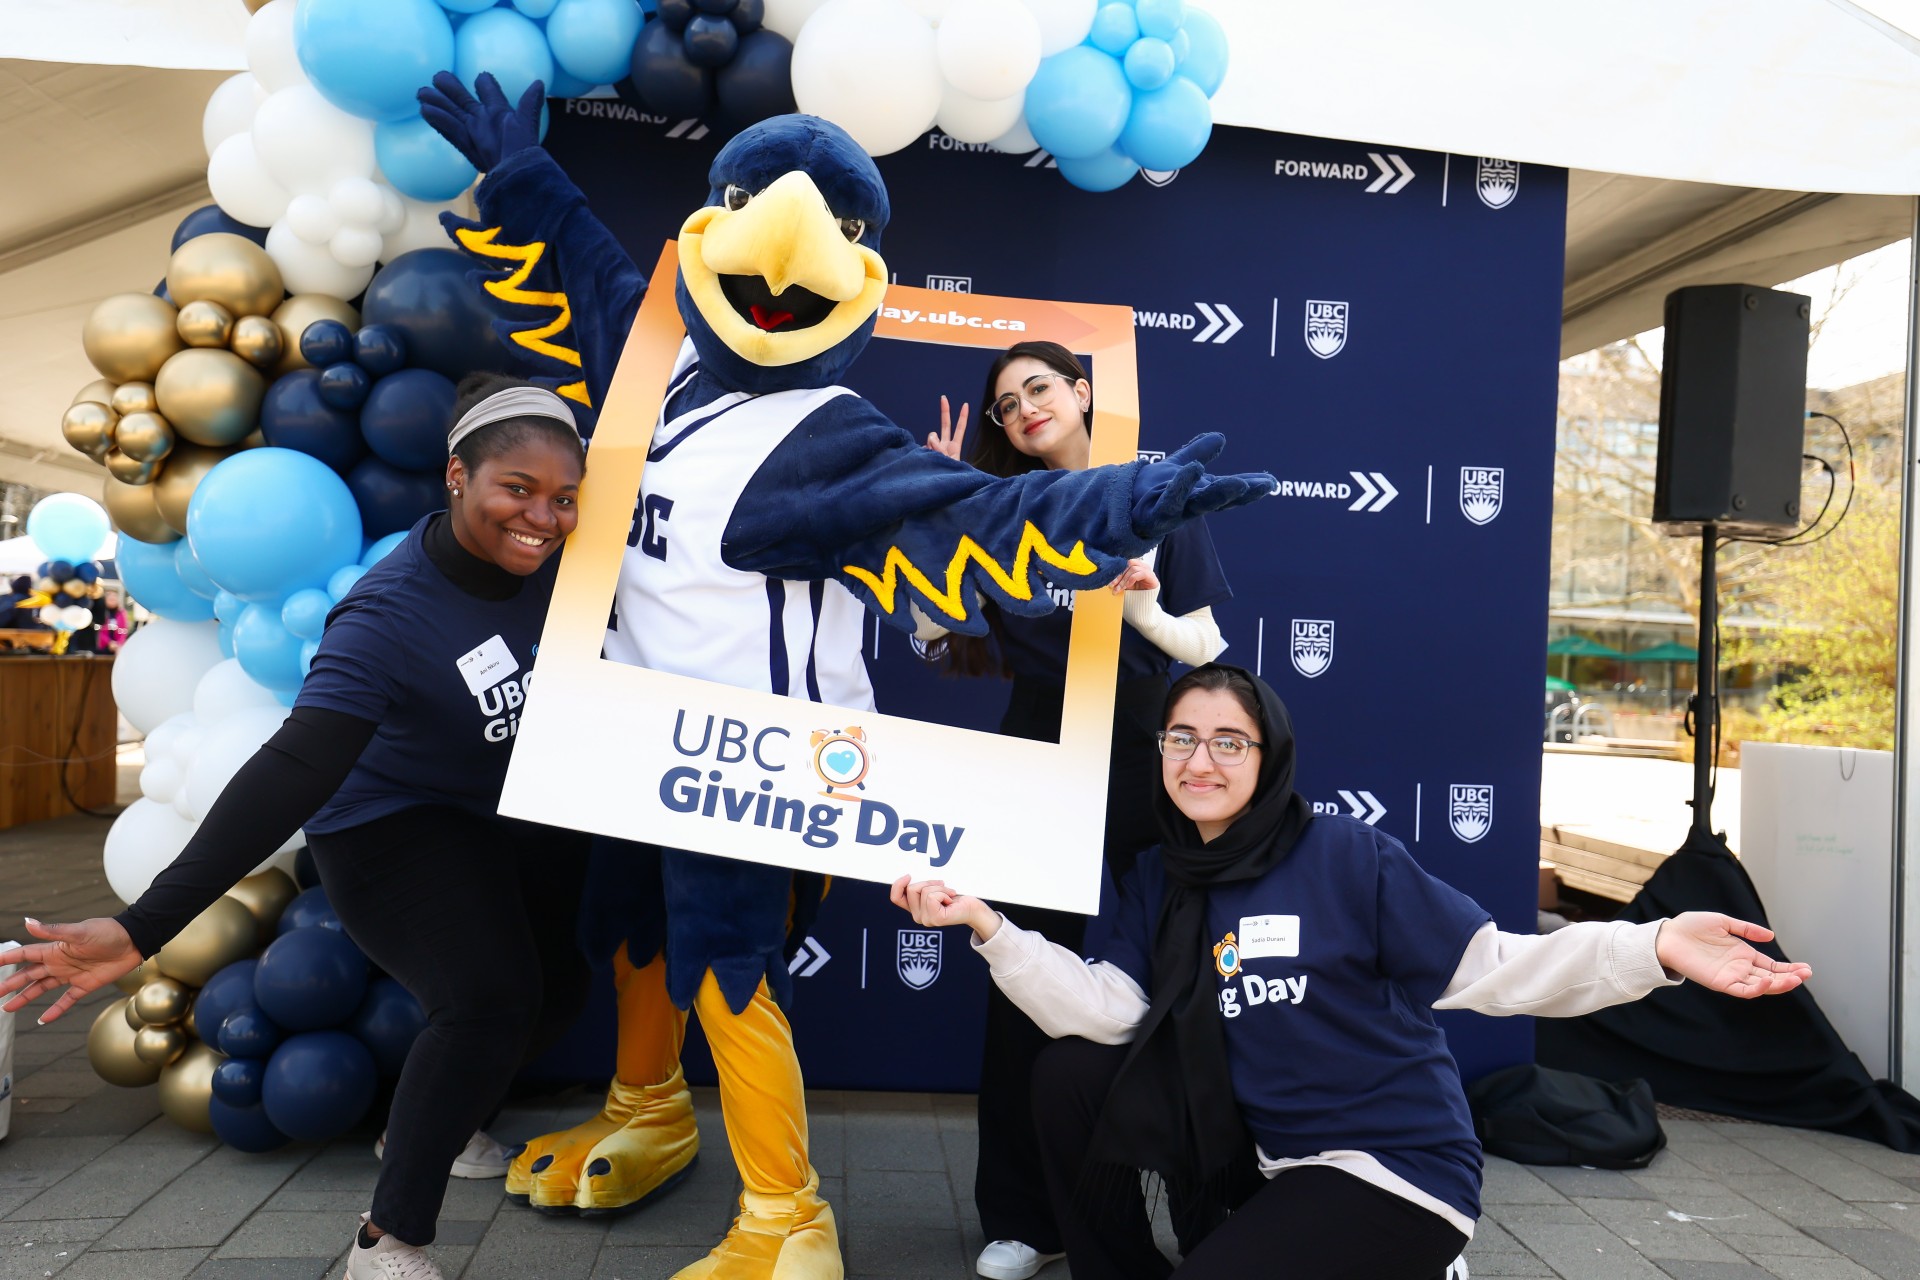 Group of cheerful volunteers posing with Thunder at UBC Giving Day event.